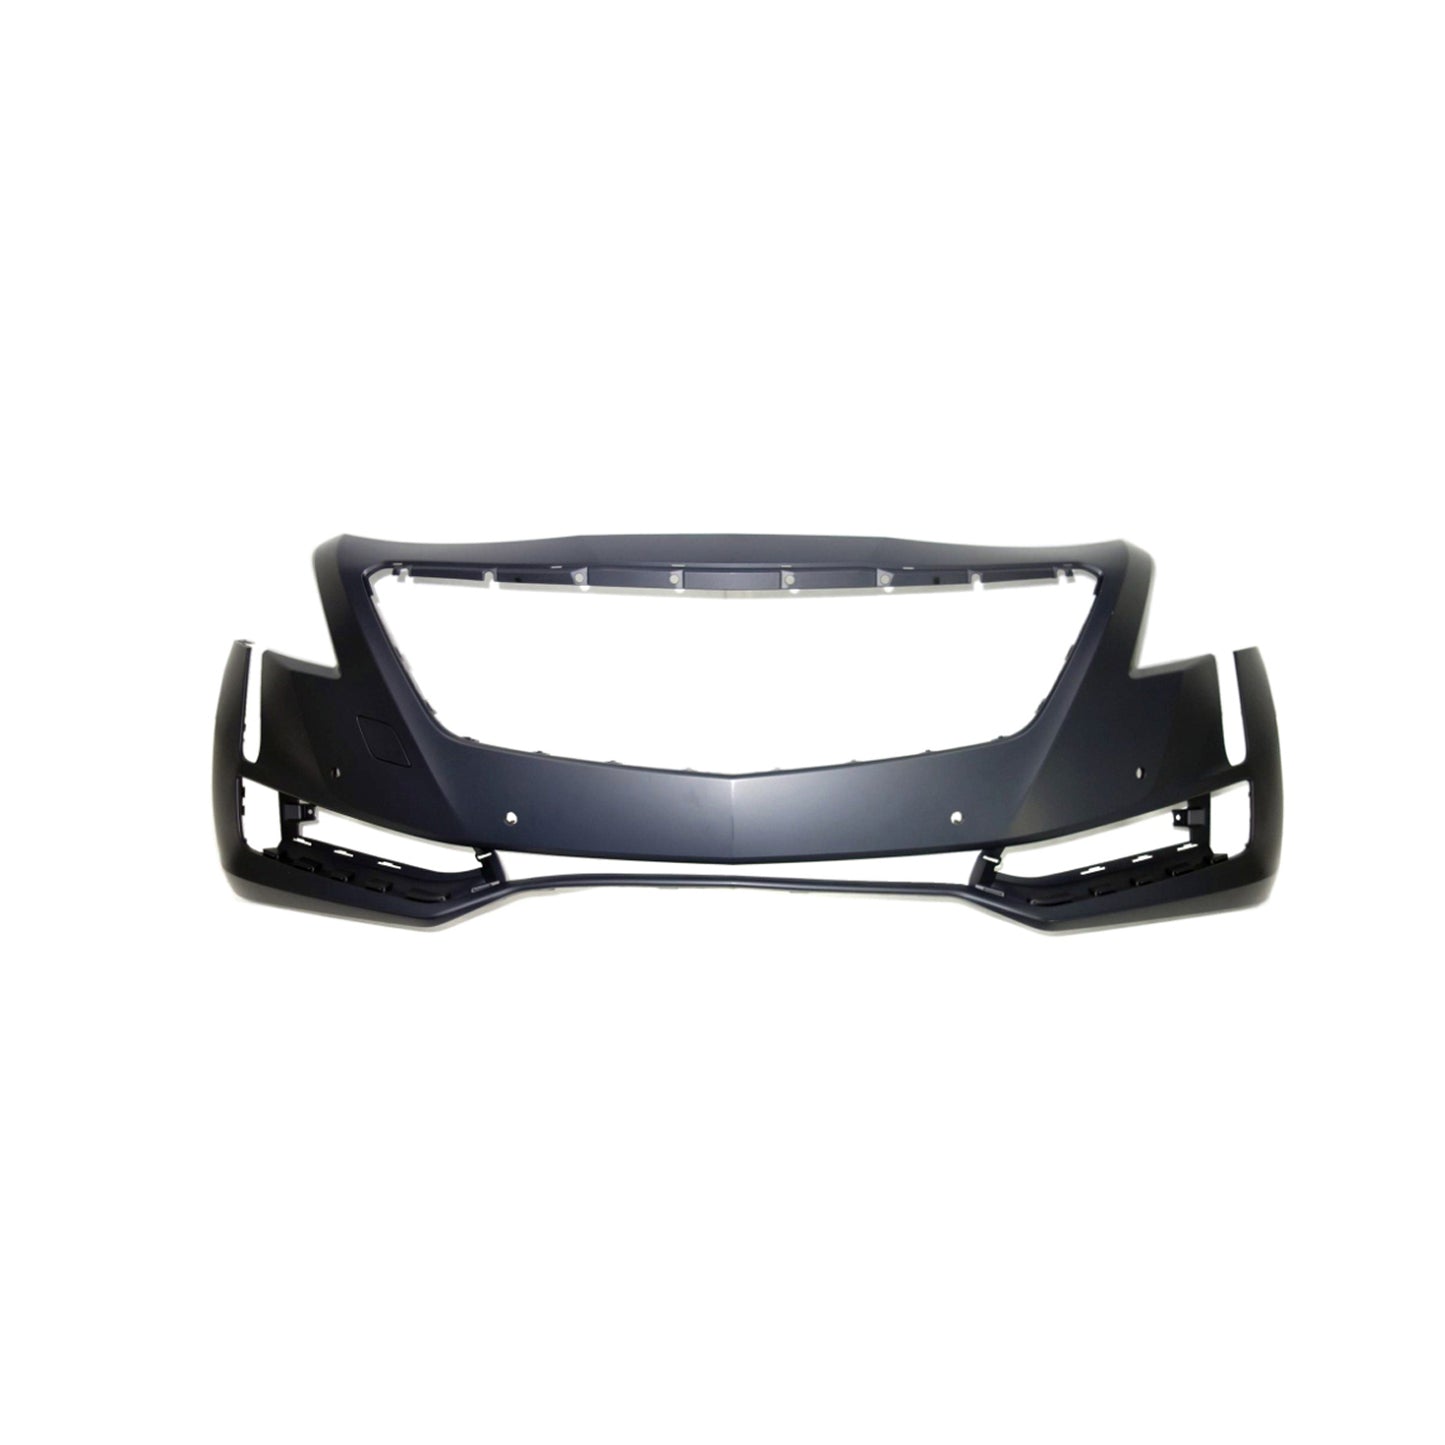 1000 | 2016-2018 CADILLAC CT6 Front bumper cover BASE; w/o Surround View; prime | GM1000A03|84227255